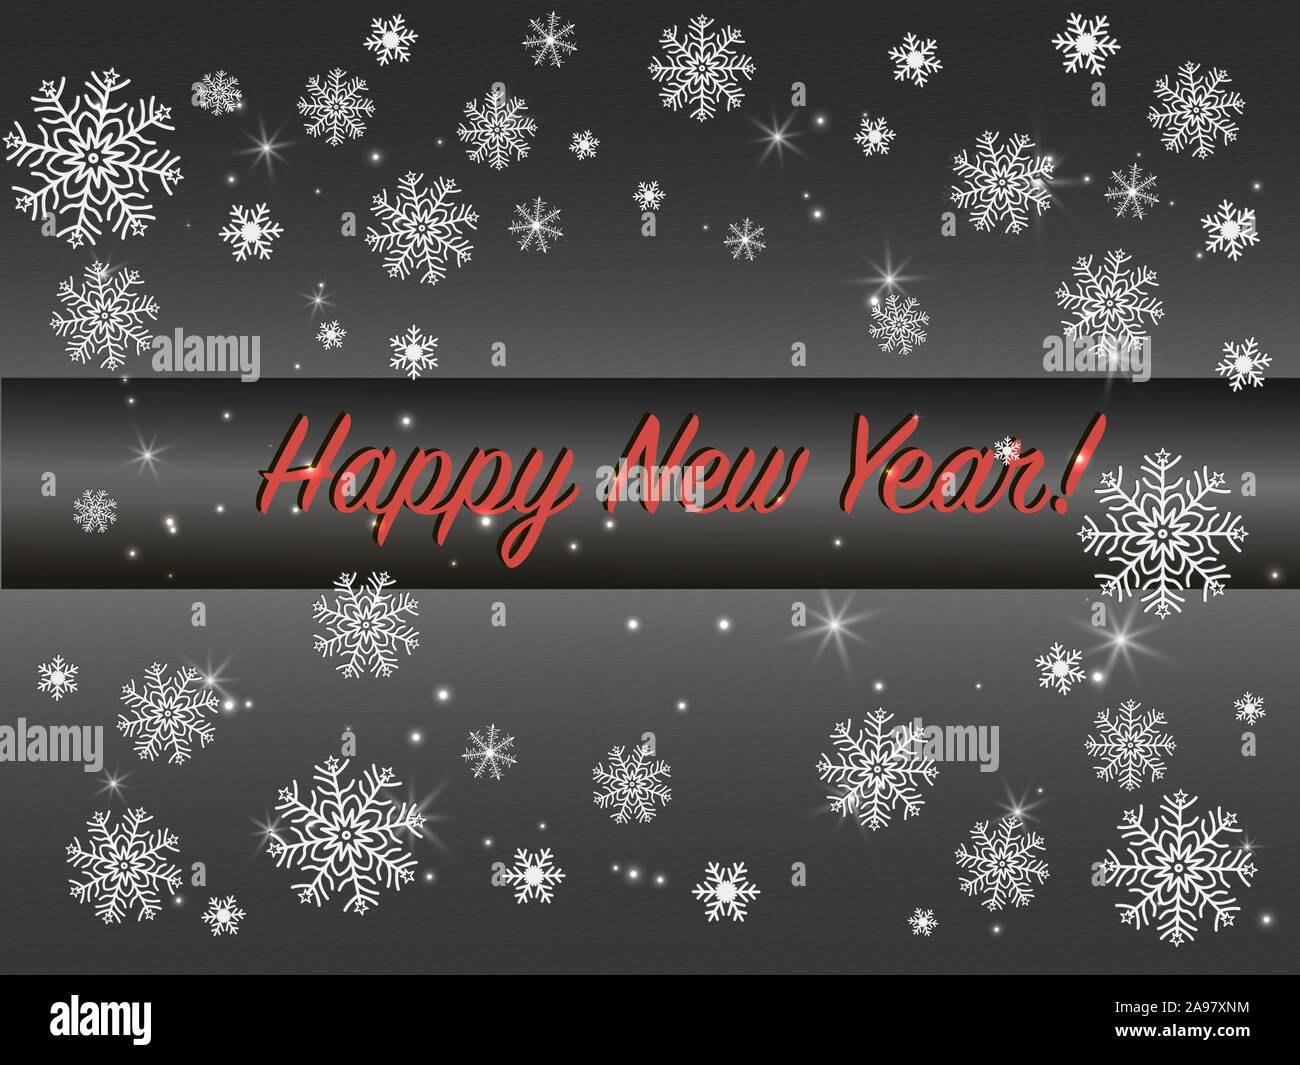 New year theme vector illustration elements isolated on transparent background. Stock Vector